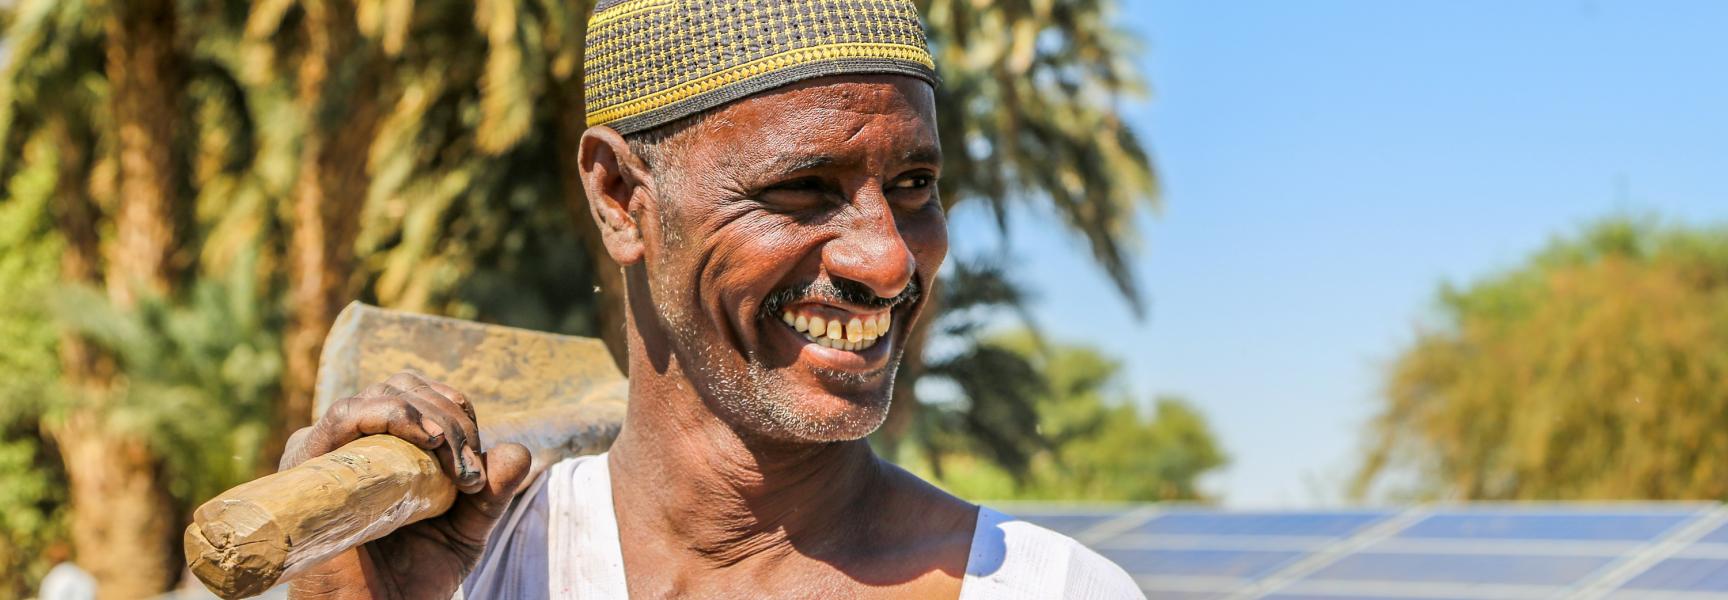 Man using solar energy for agriculture in Sudan